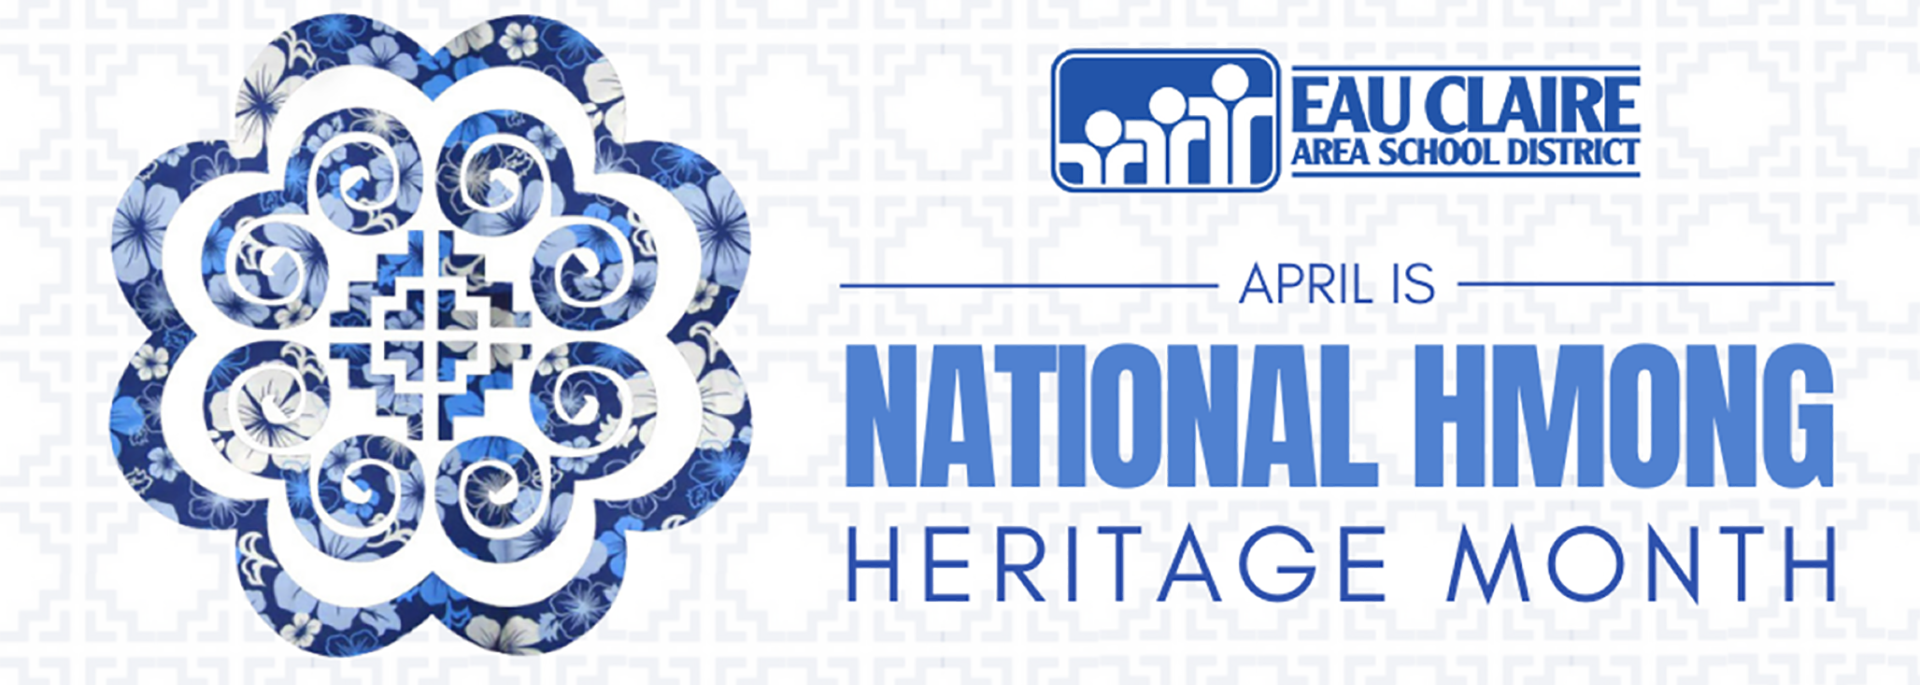 hmong heritage month graphic